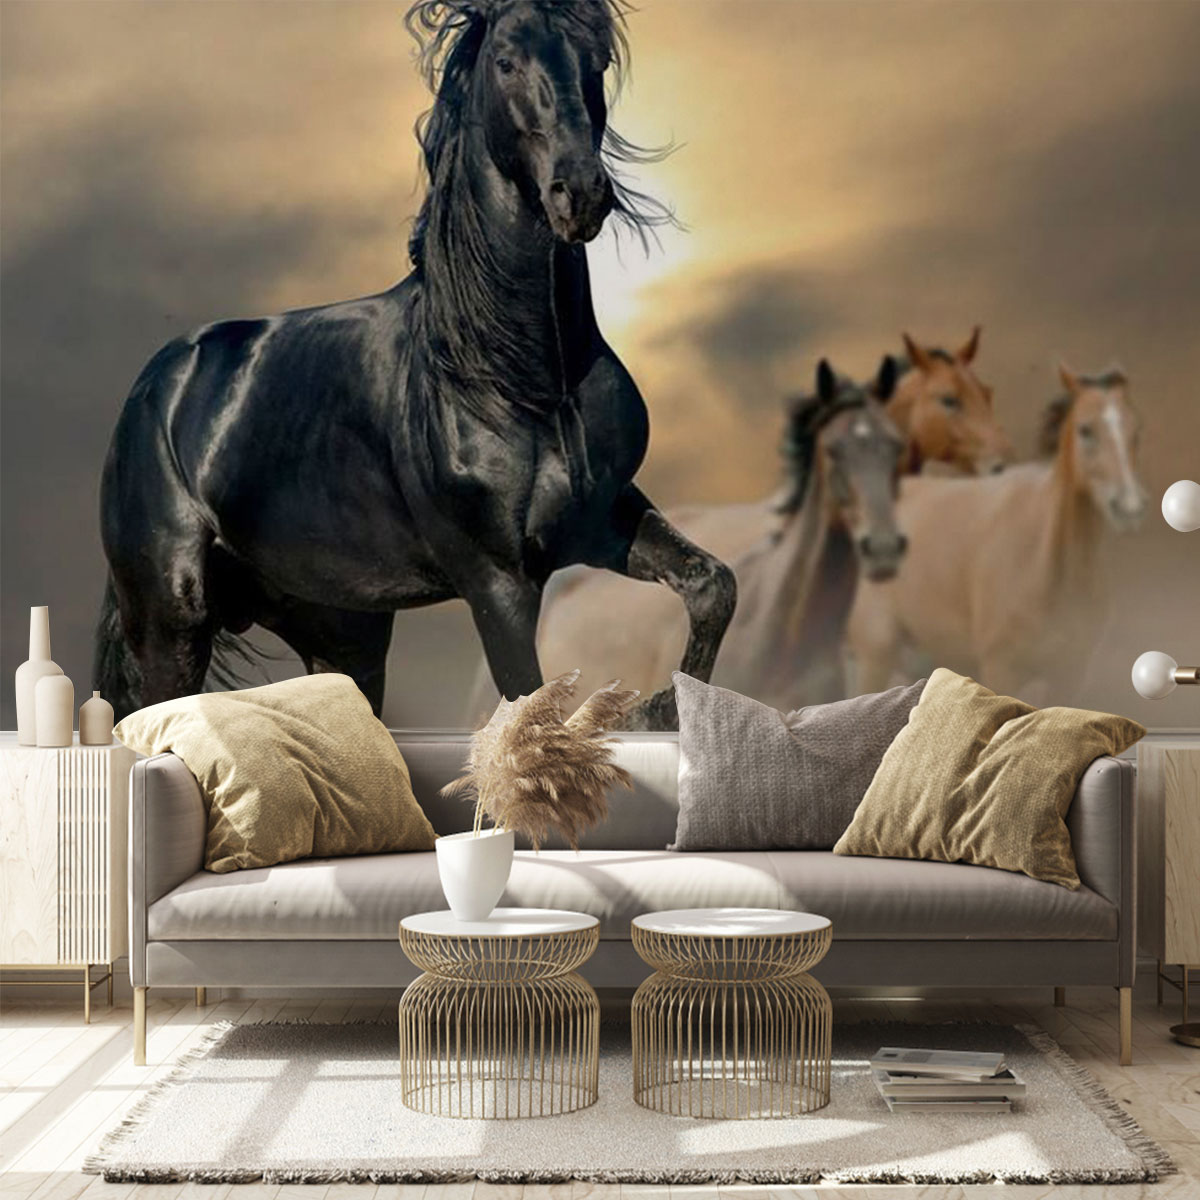 Horse In The Wild Wall Mural_2_1